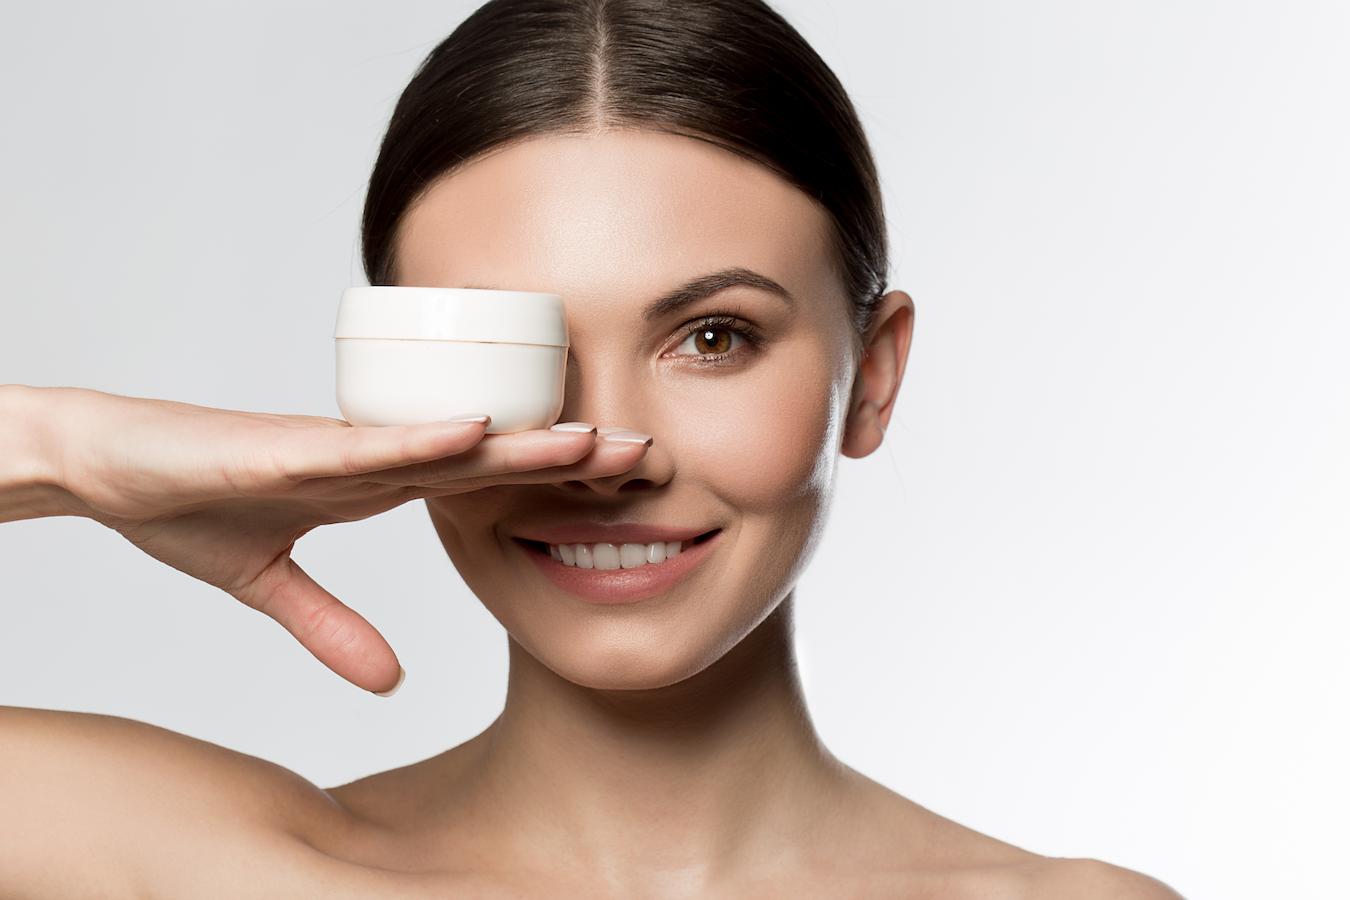 Using eye cream can reduce puffiness and promote hydration